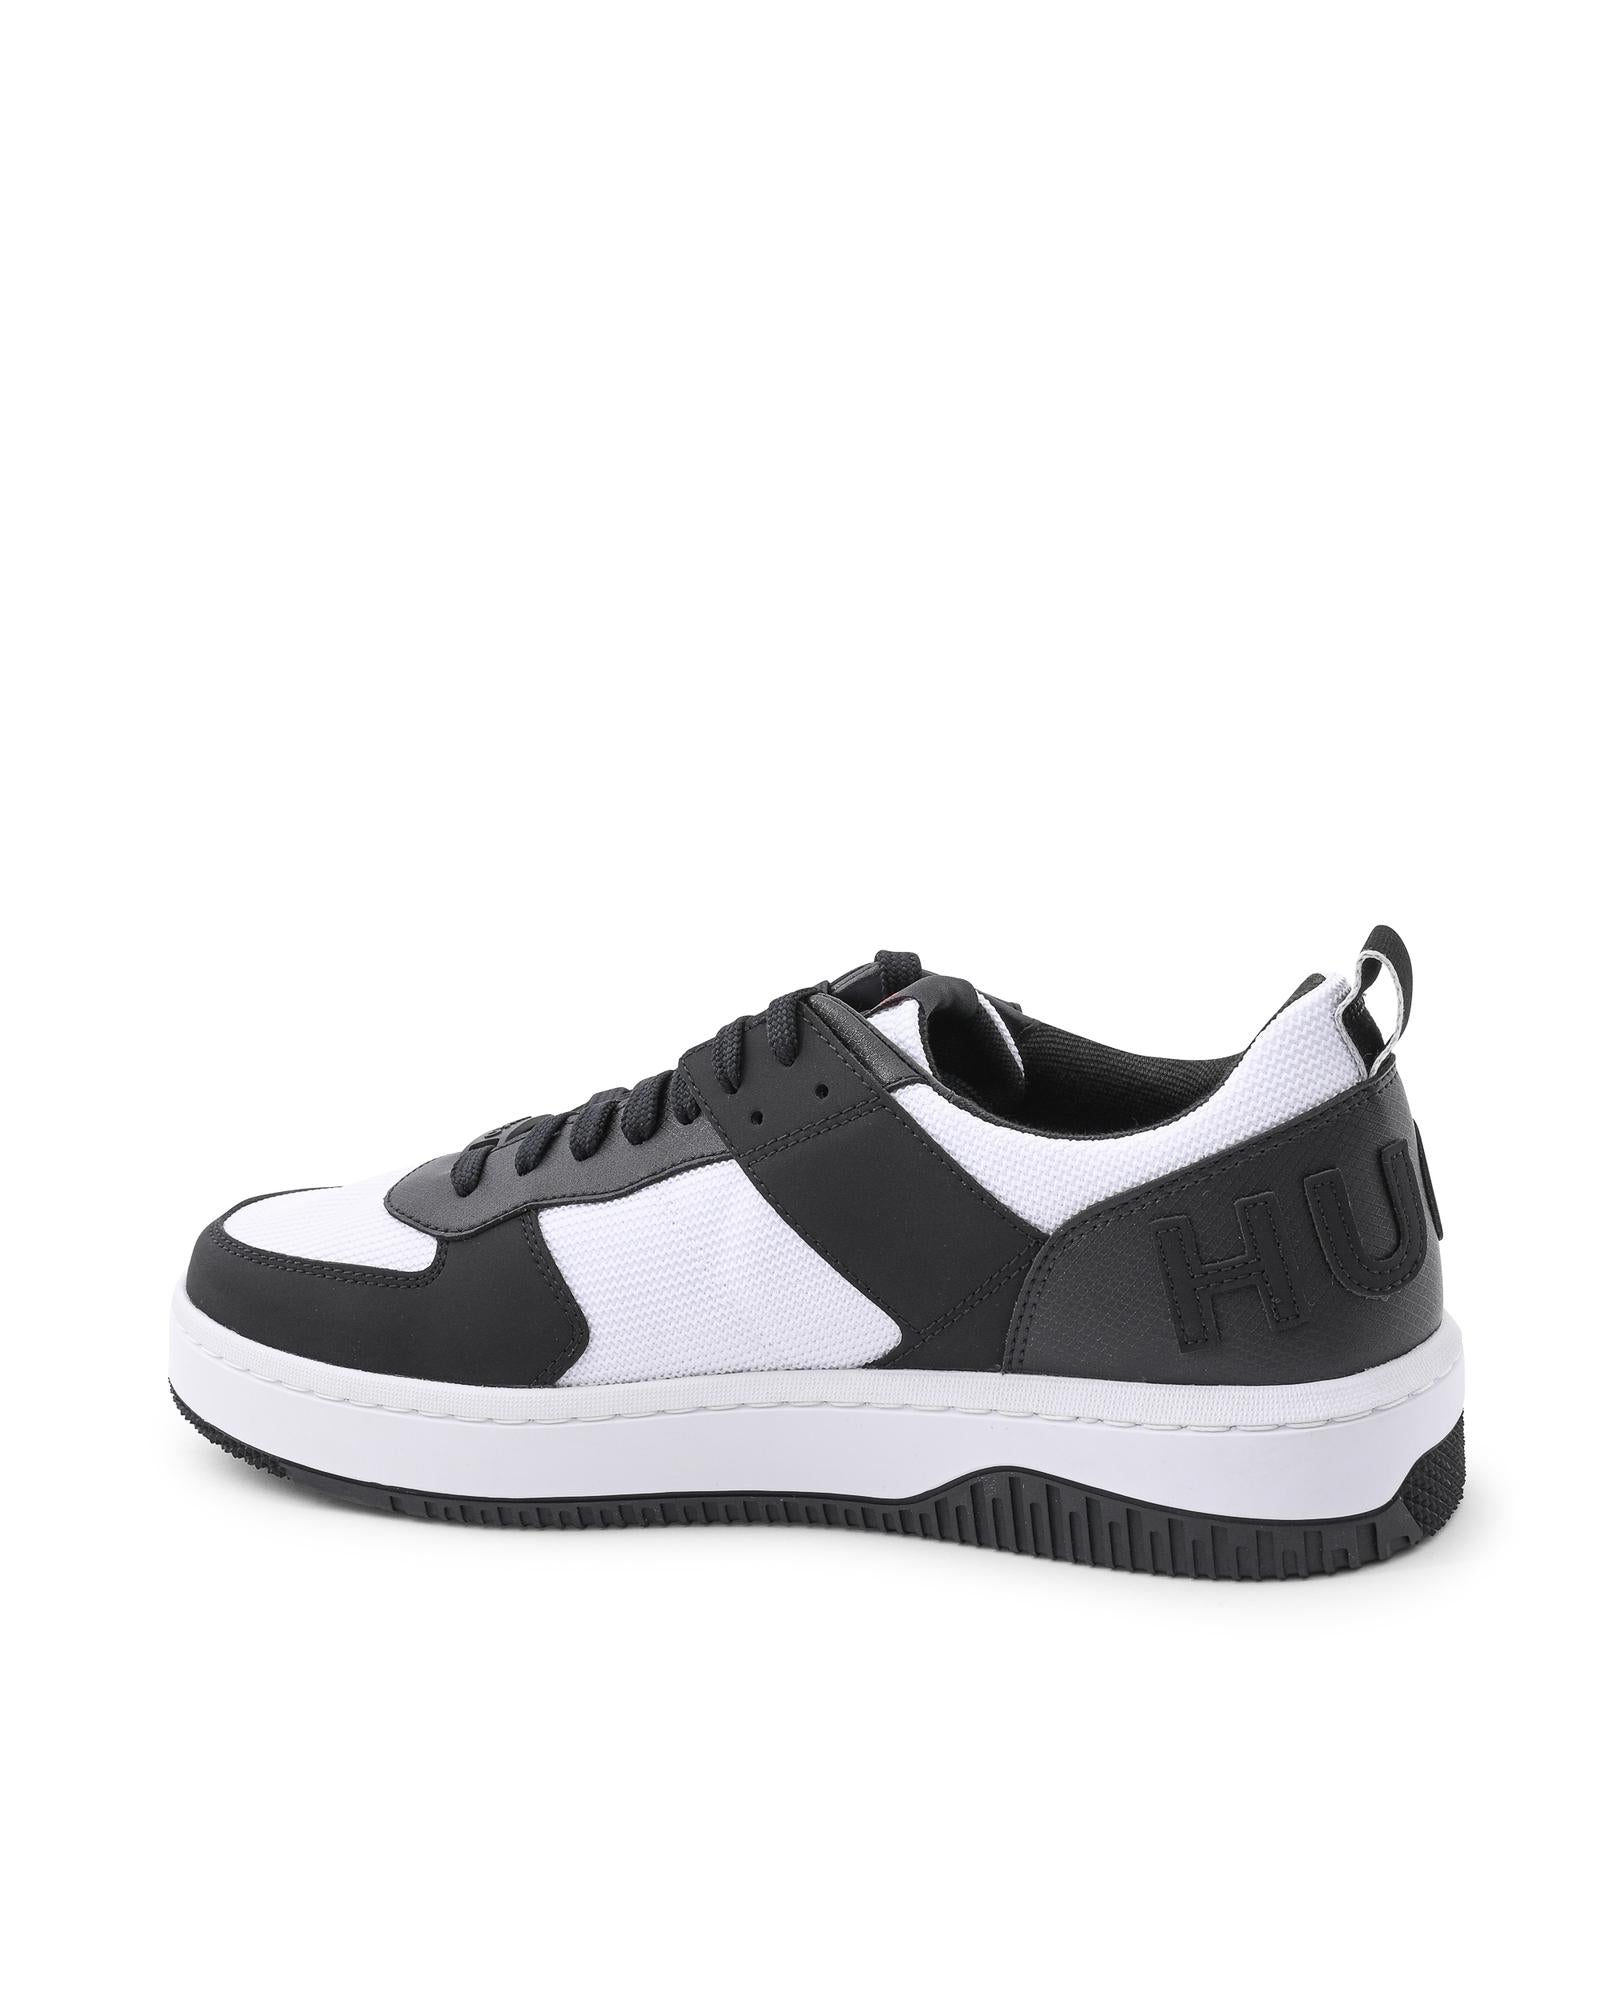 Men's Charcoal Calfskin Sneakers with Rubber Sole in Multicolor - 44 EU